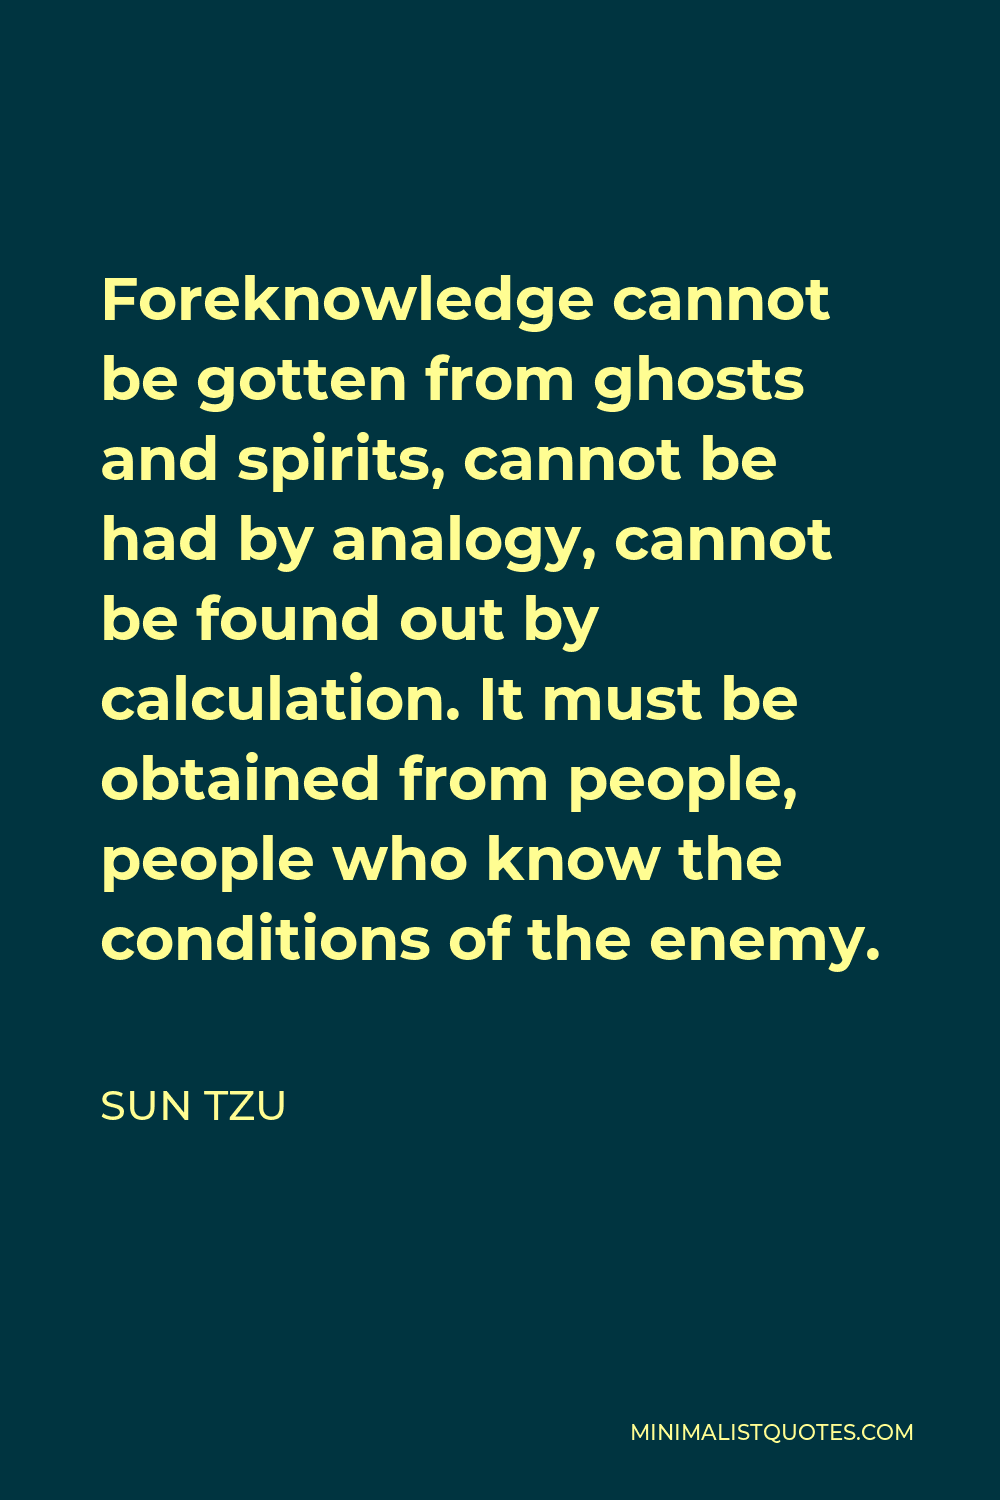 Sun Tzu Quote - Foreknowledge cannot be gotten from ghosts and spirits, cannot be had by analogy, cannot be found out by calculation. It must be obtained from people, people who know the conditions of the enemy.